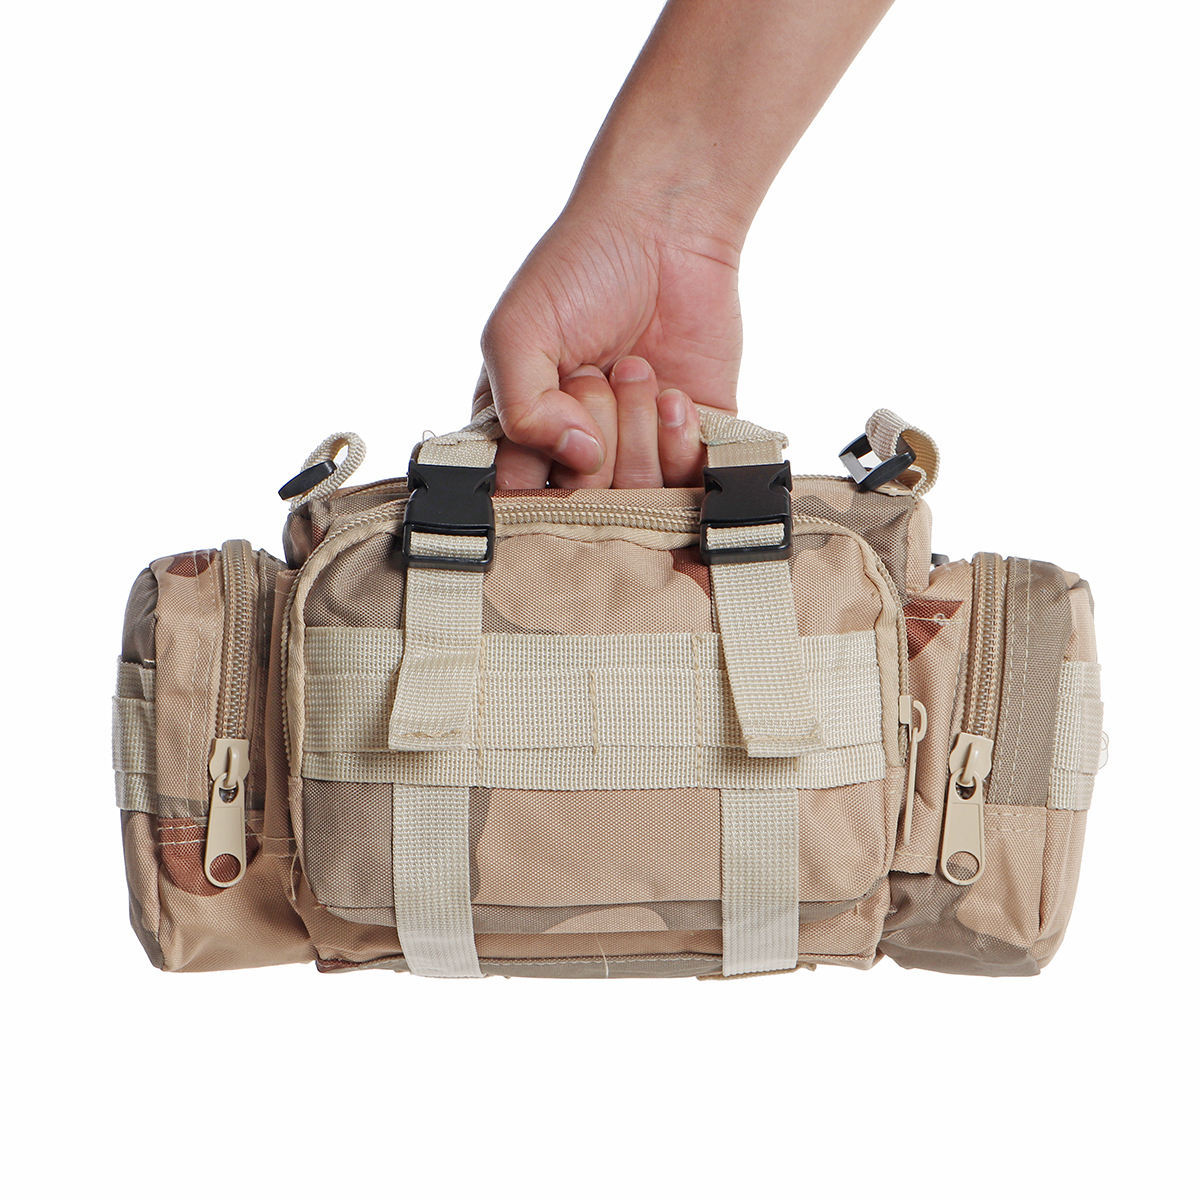 Multifunctional-Outdoor-Sports-Hiking-with-Zippers-Nylon-Oxford-Cloth-Tactical-Shoulder-Bag-Waist-Pa-1825563-17